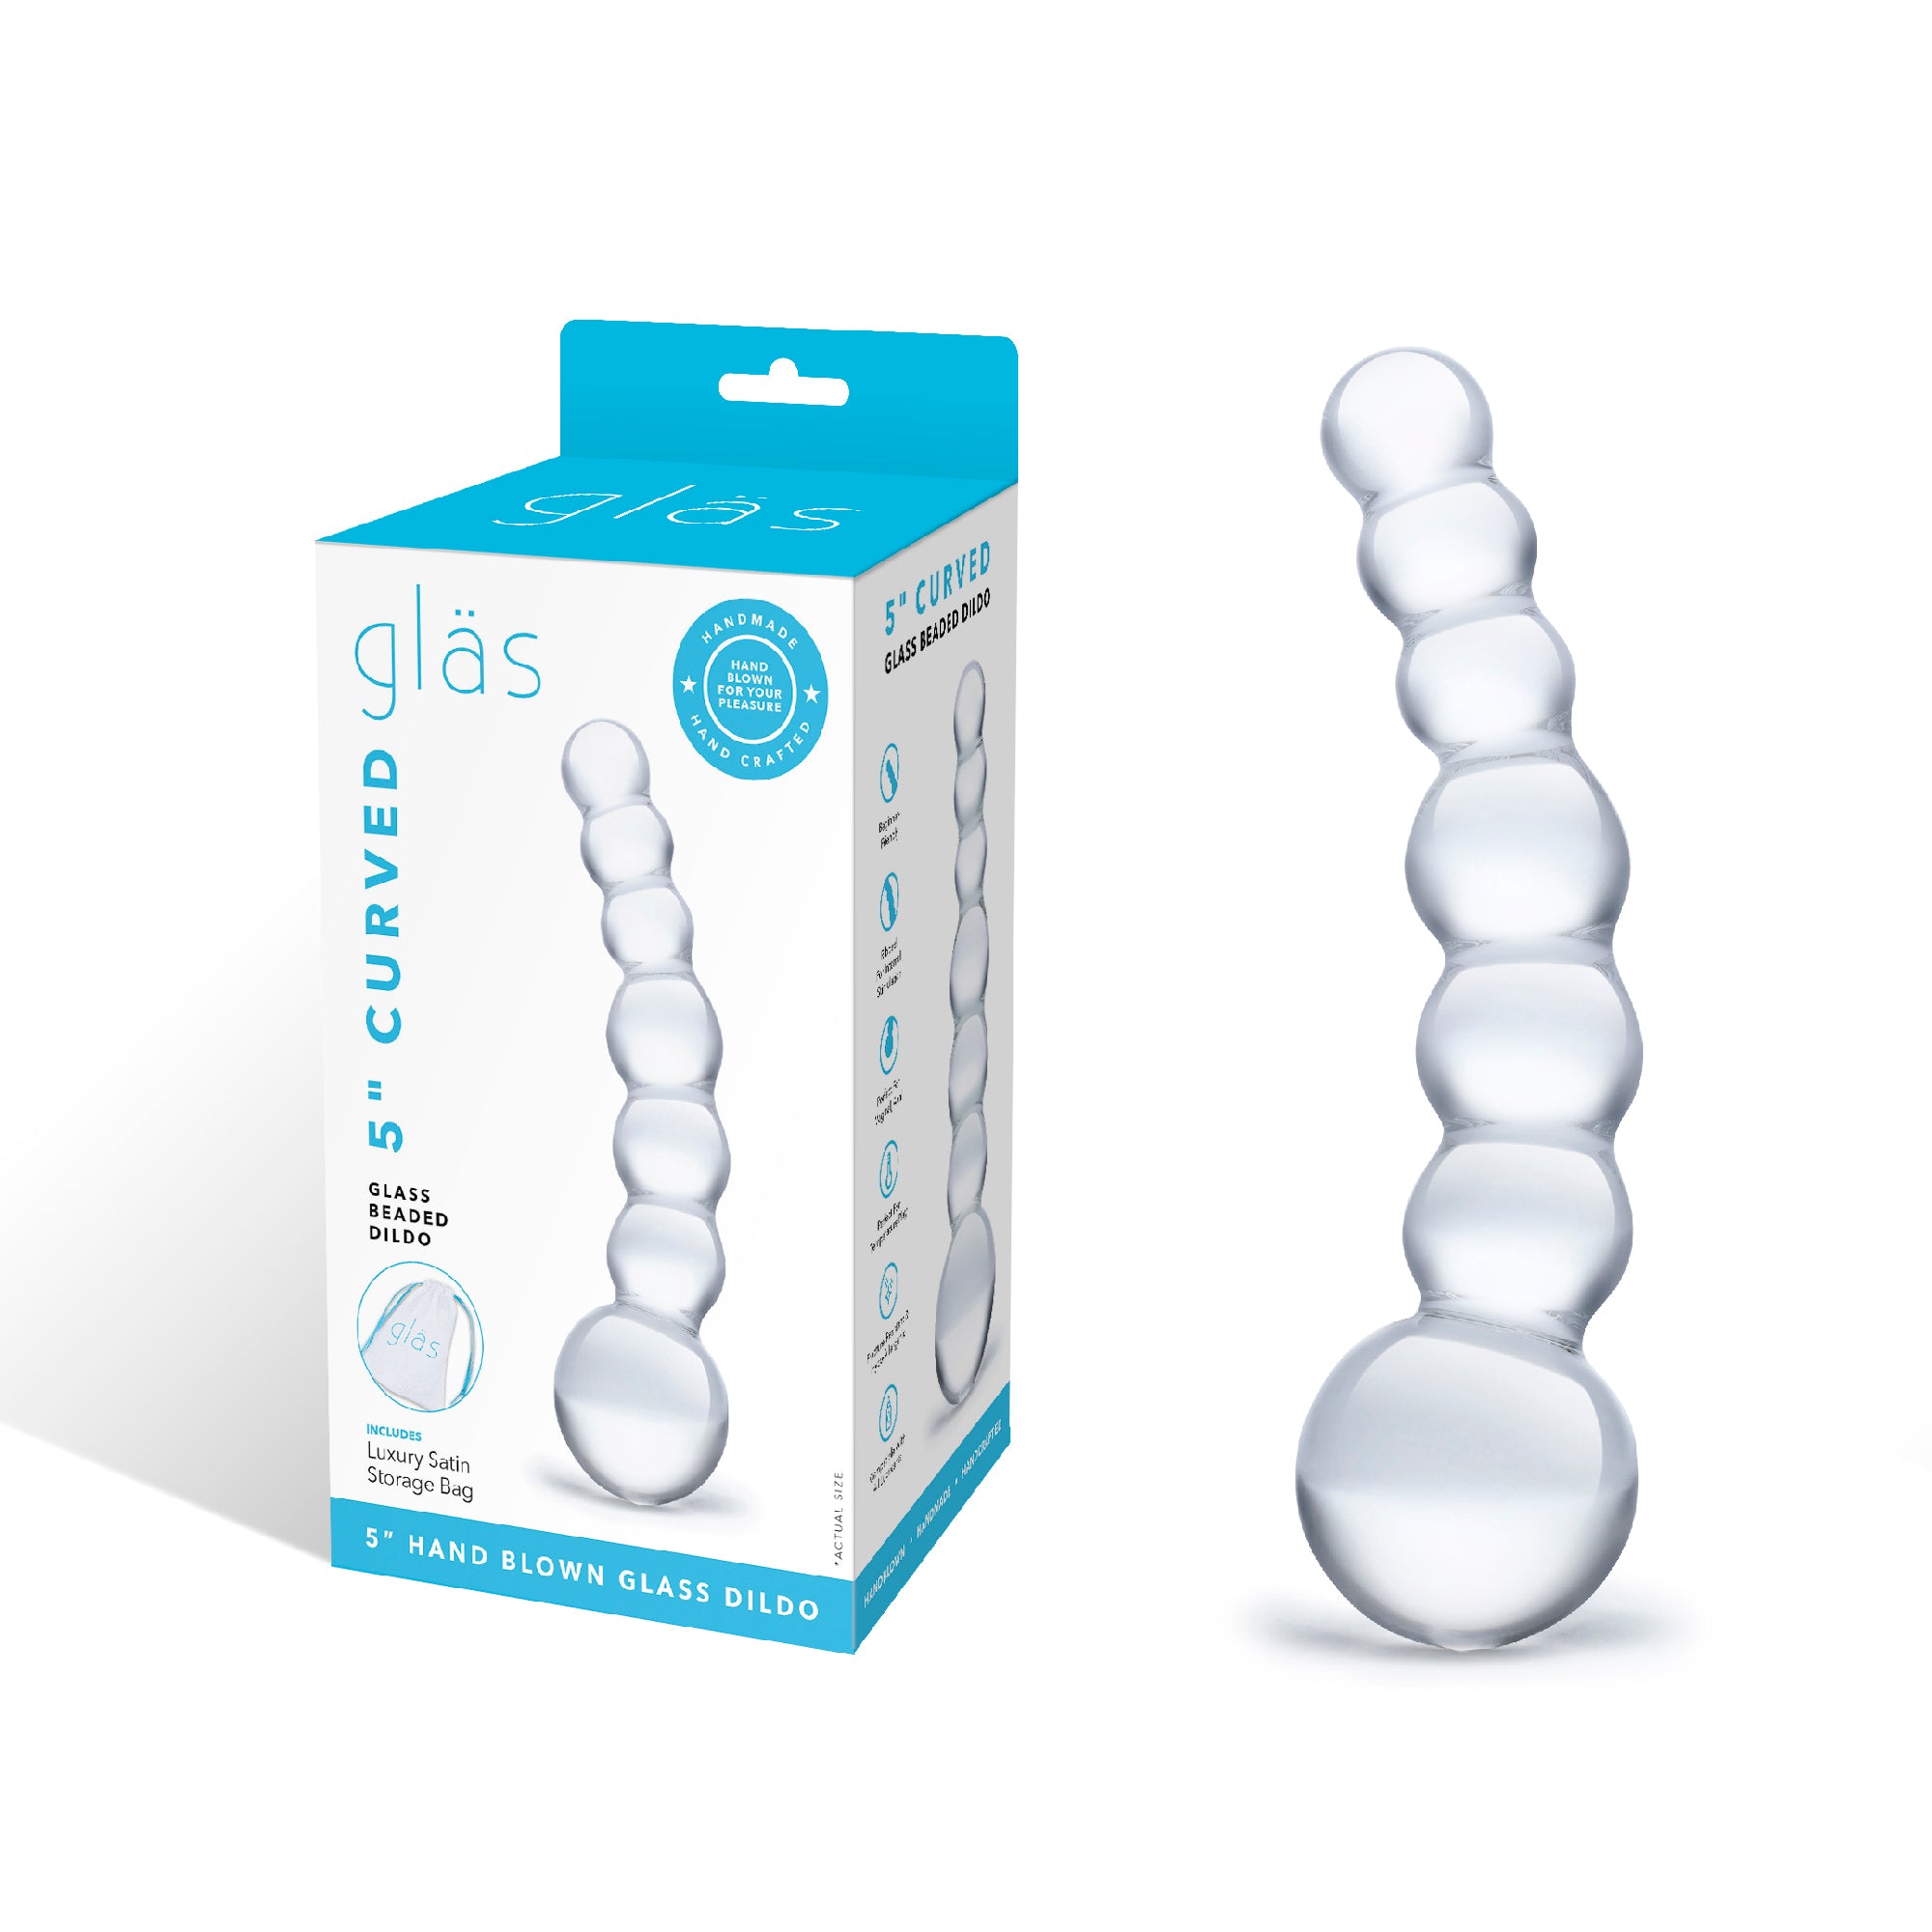 Packaging of the Gläs 5 inch Curved Glass Beaded Dildo